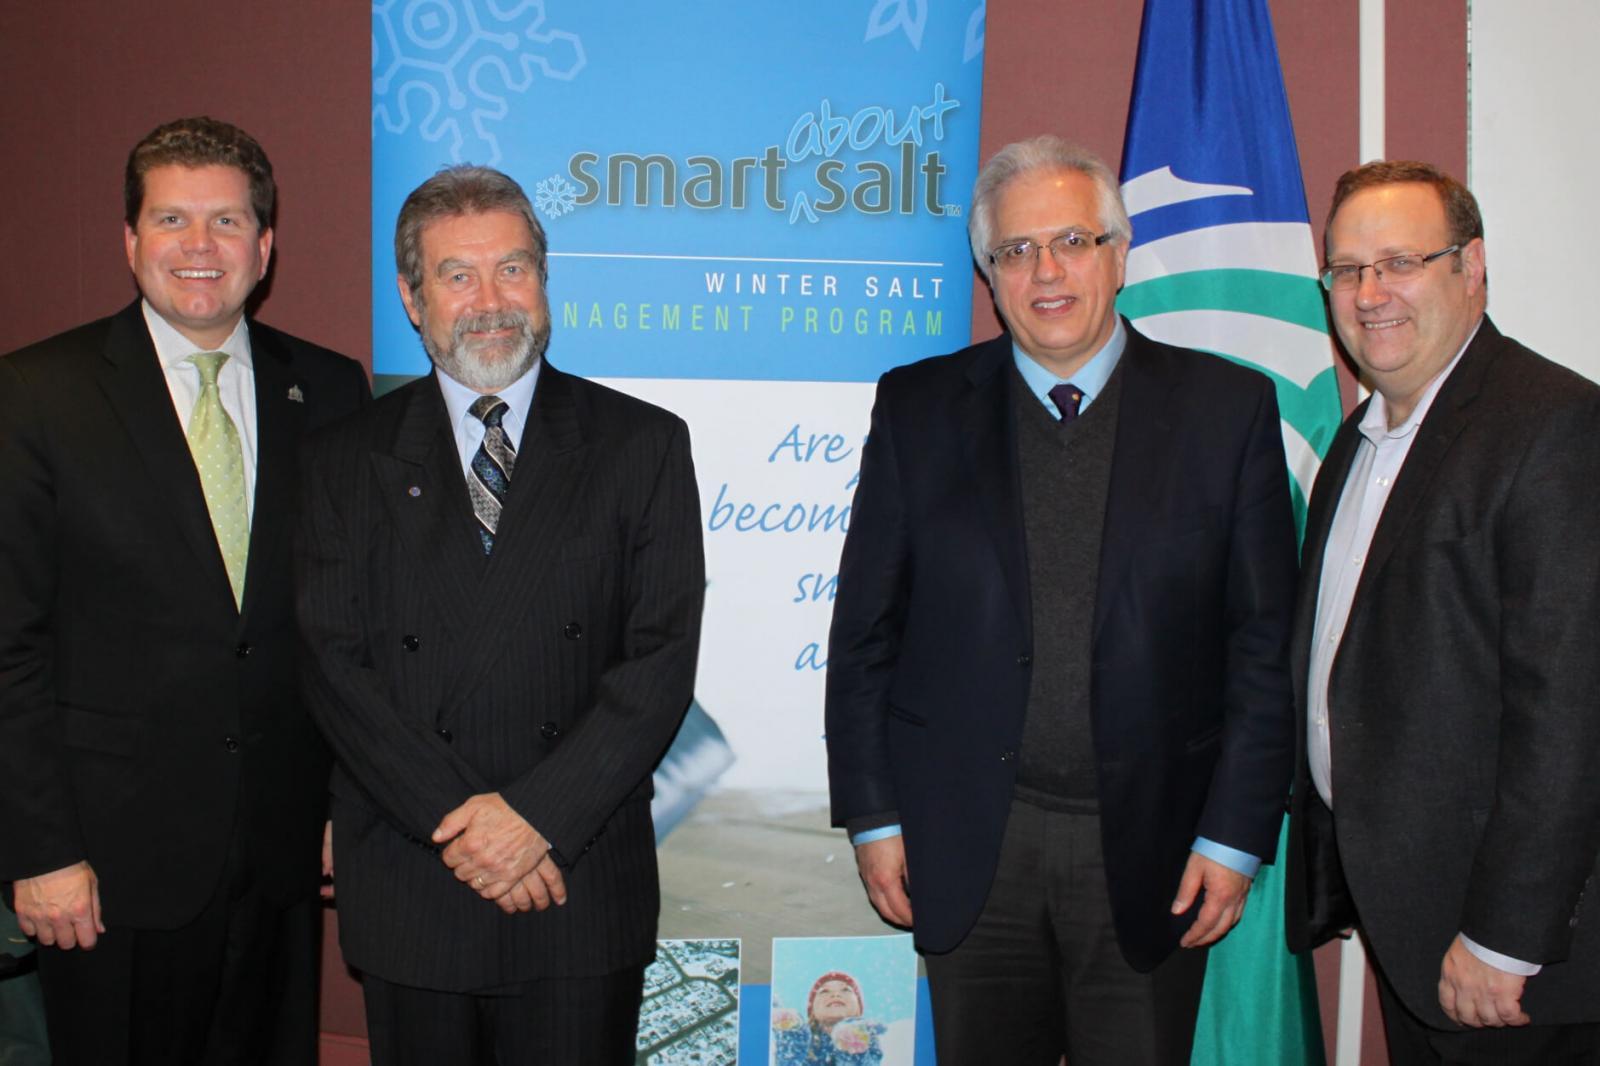 City of Ottawa takes leadership role in salt reduction